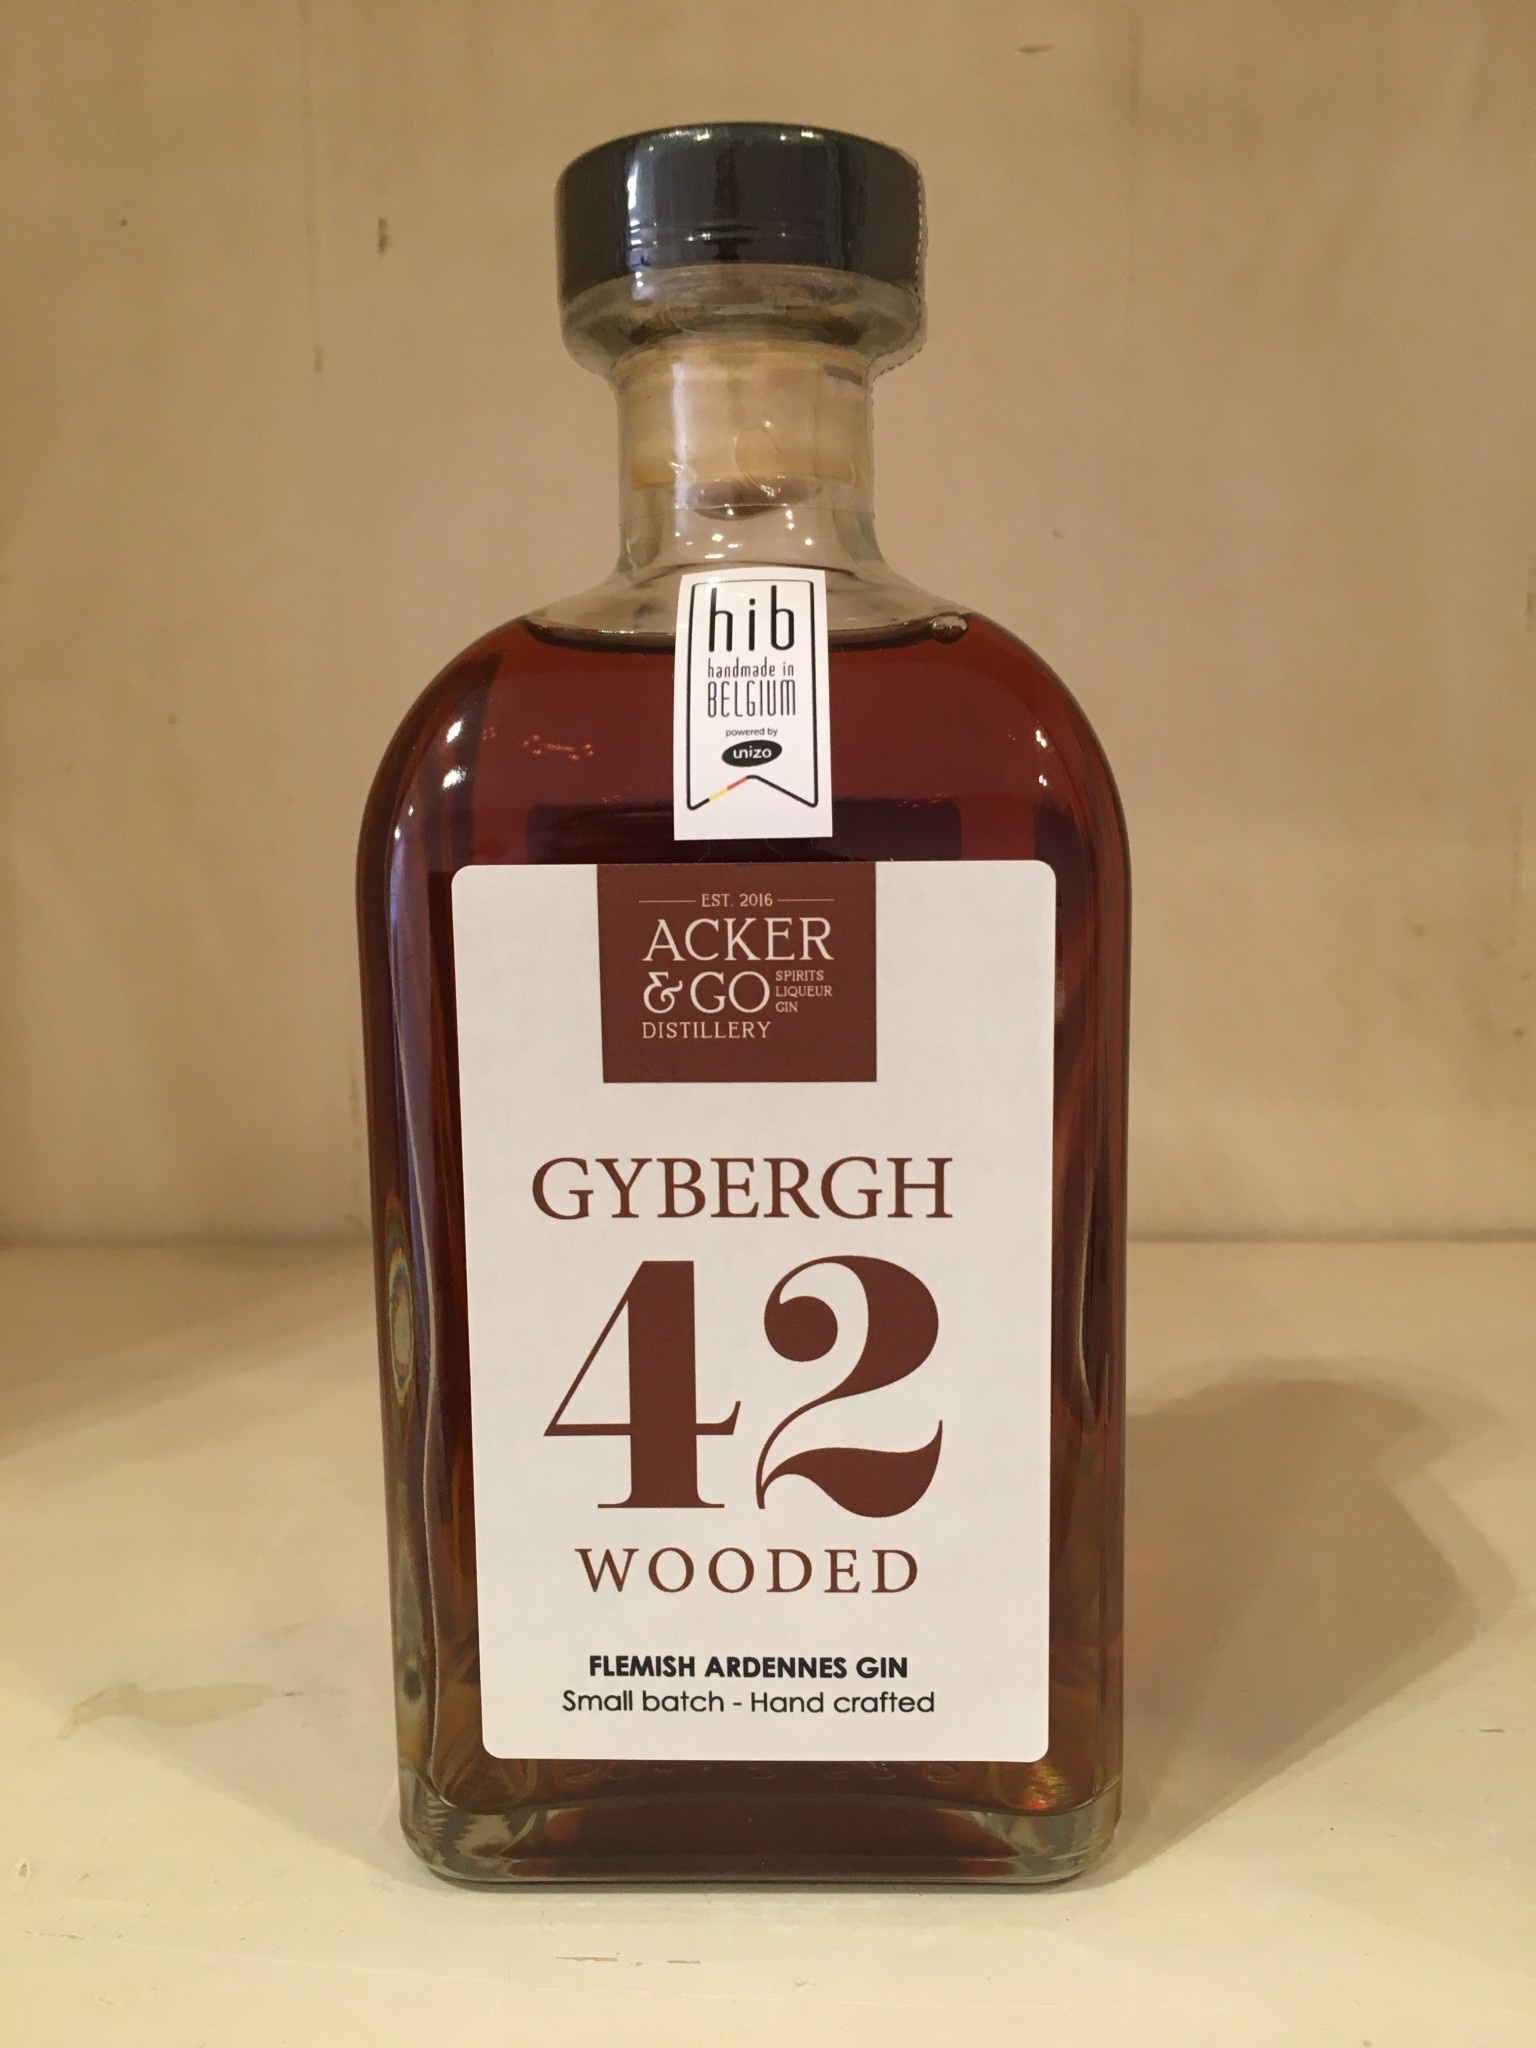 Gybergh 42 Wooded-2